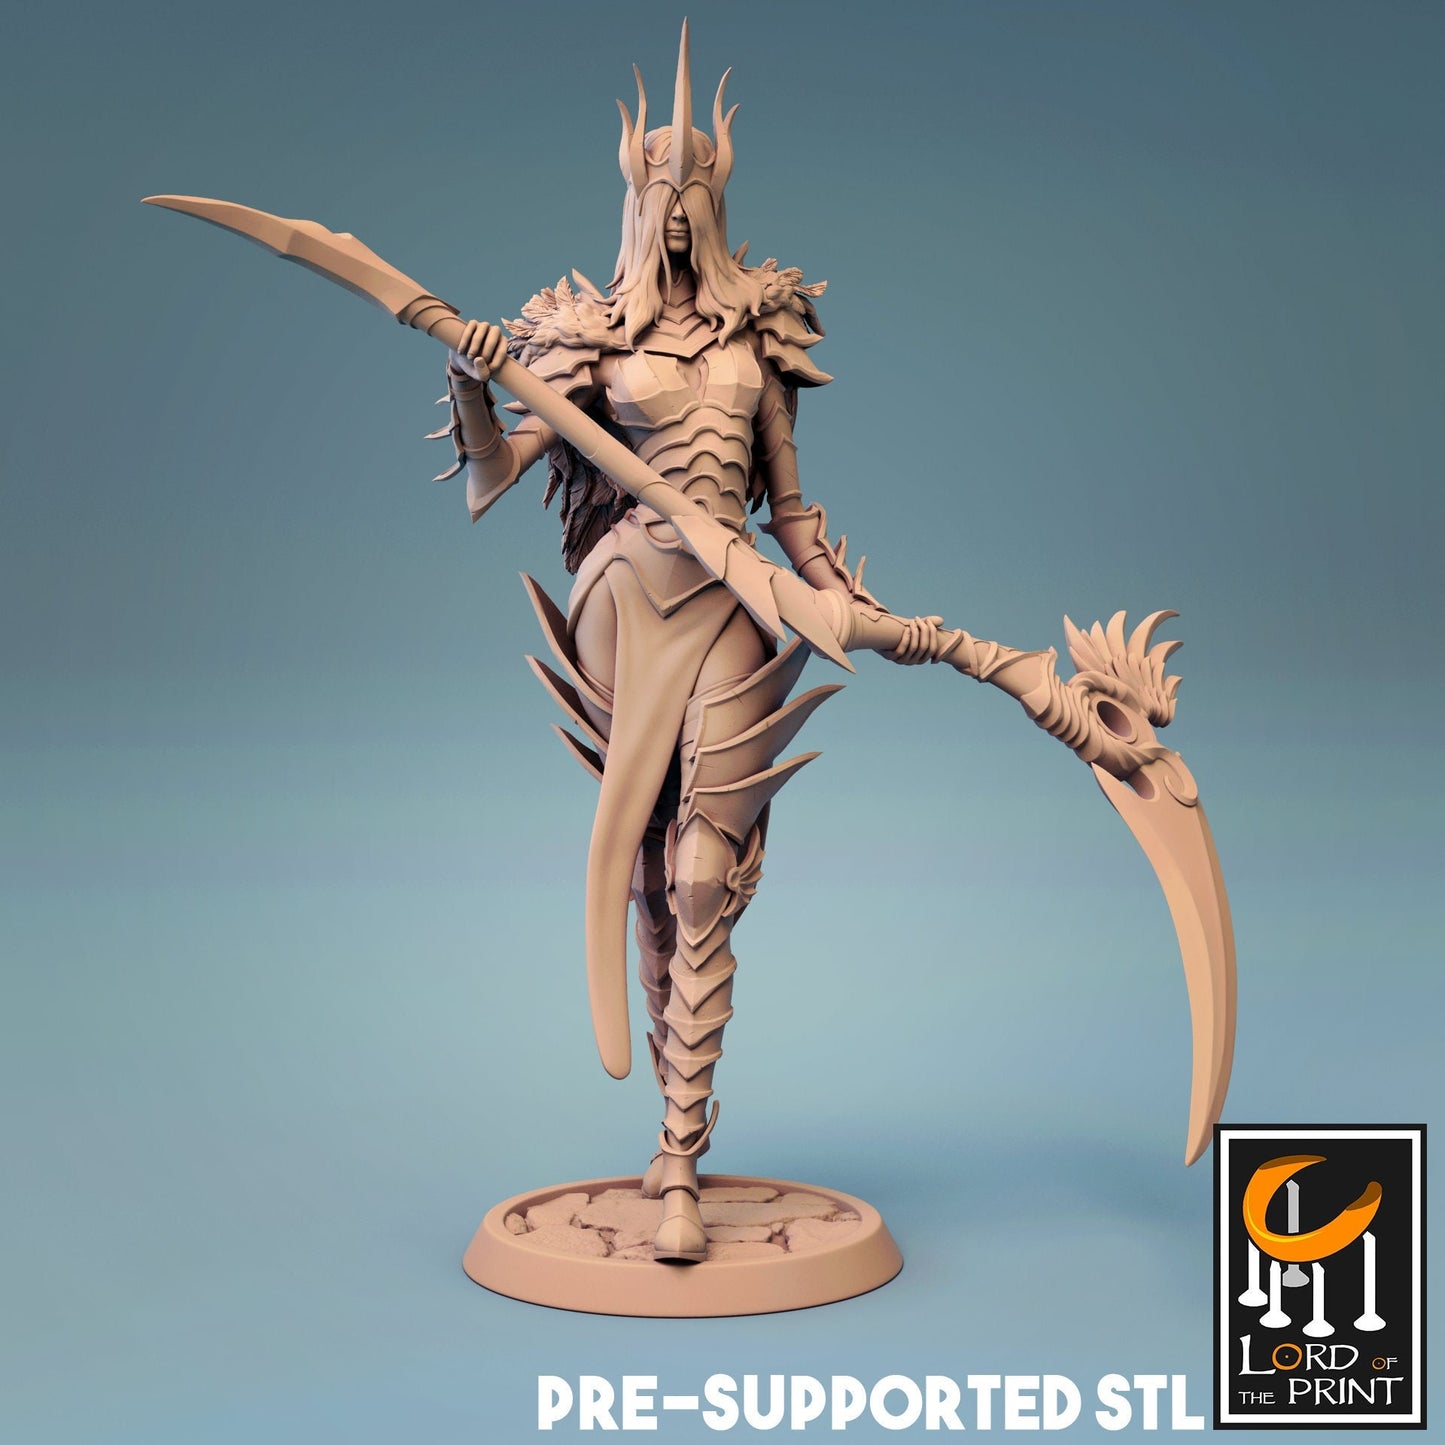 Army of Death - Female Human Fighter D&D miniatures, by Lord of the Print // 3D Print on Demand / DnD / Pathfinder / RPG